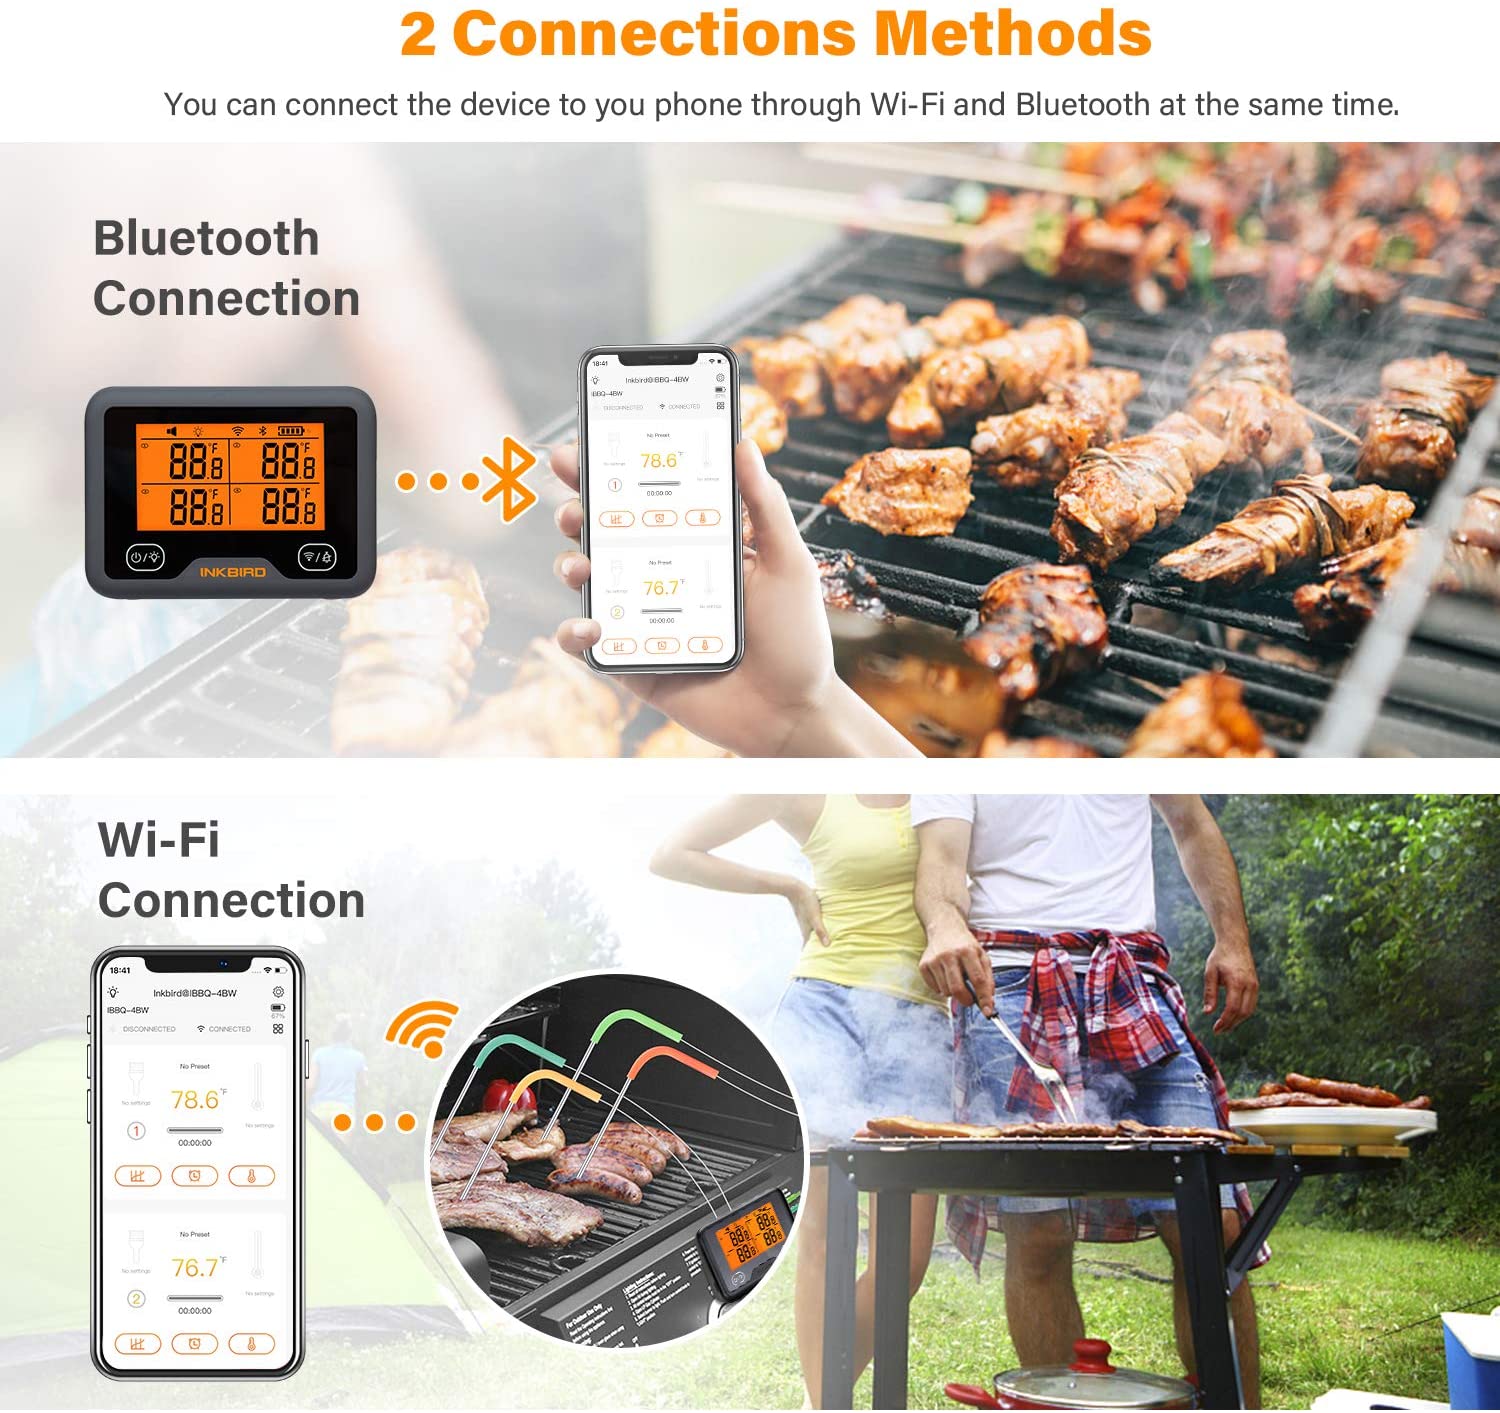 Inkbird Wi-Fi&Bluetooth Grill Thermometer IBBQ-4BW, Wireless Meat Thermometer with 4 Probes, Wifi Meat Grill Thermometer - image 5 of 7